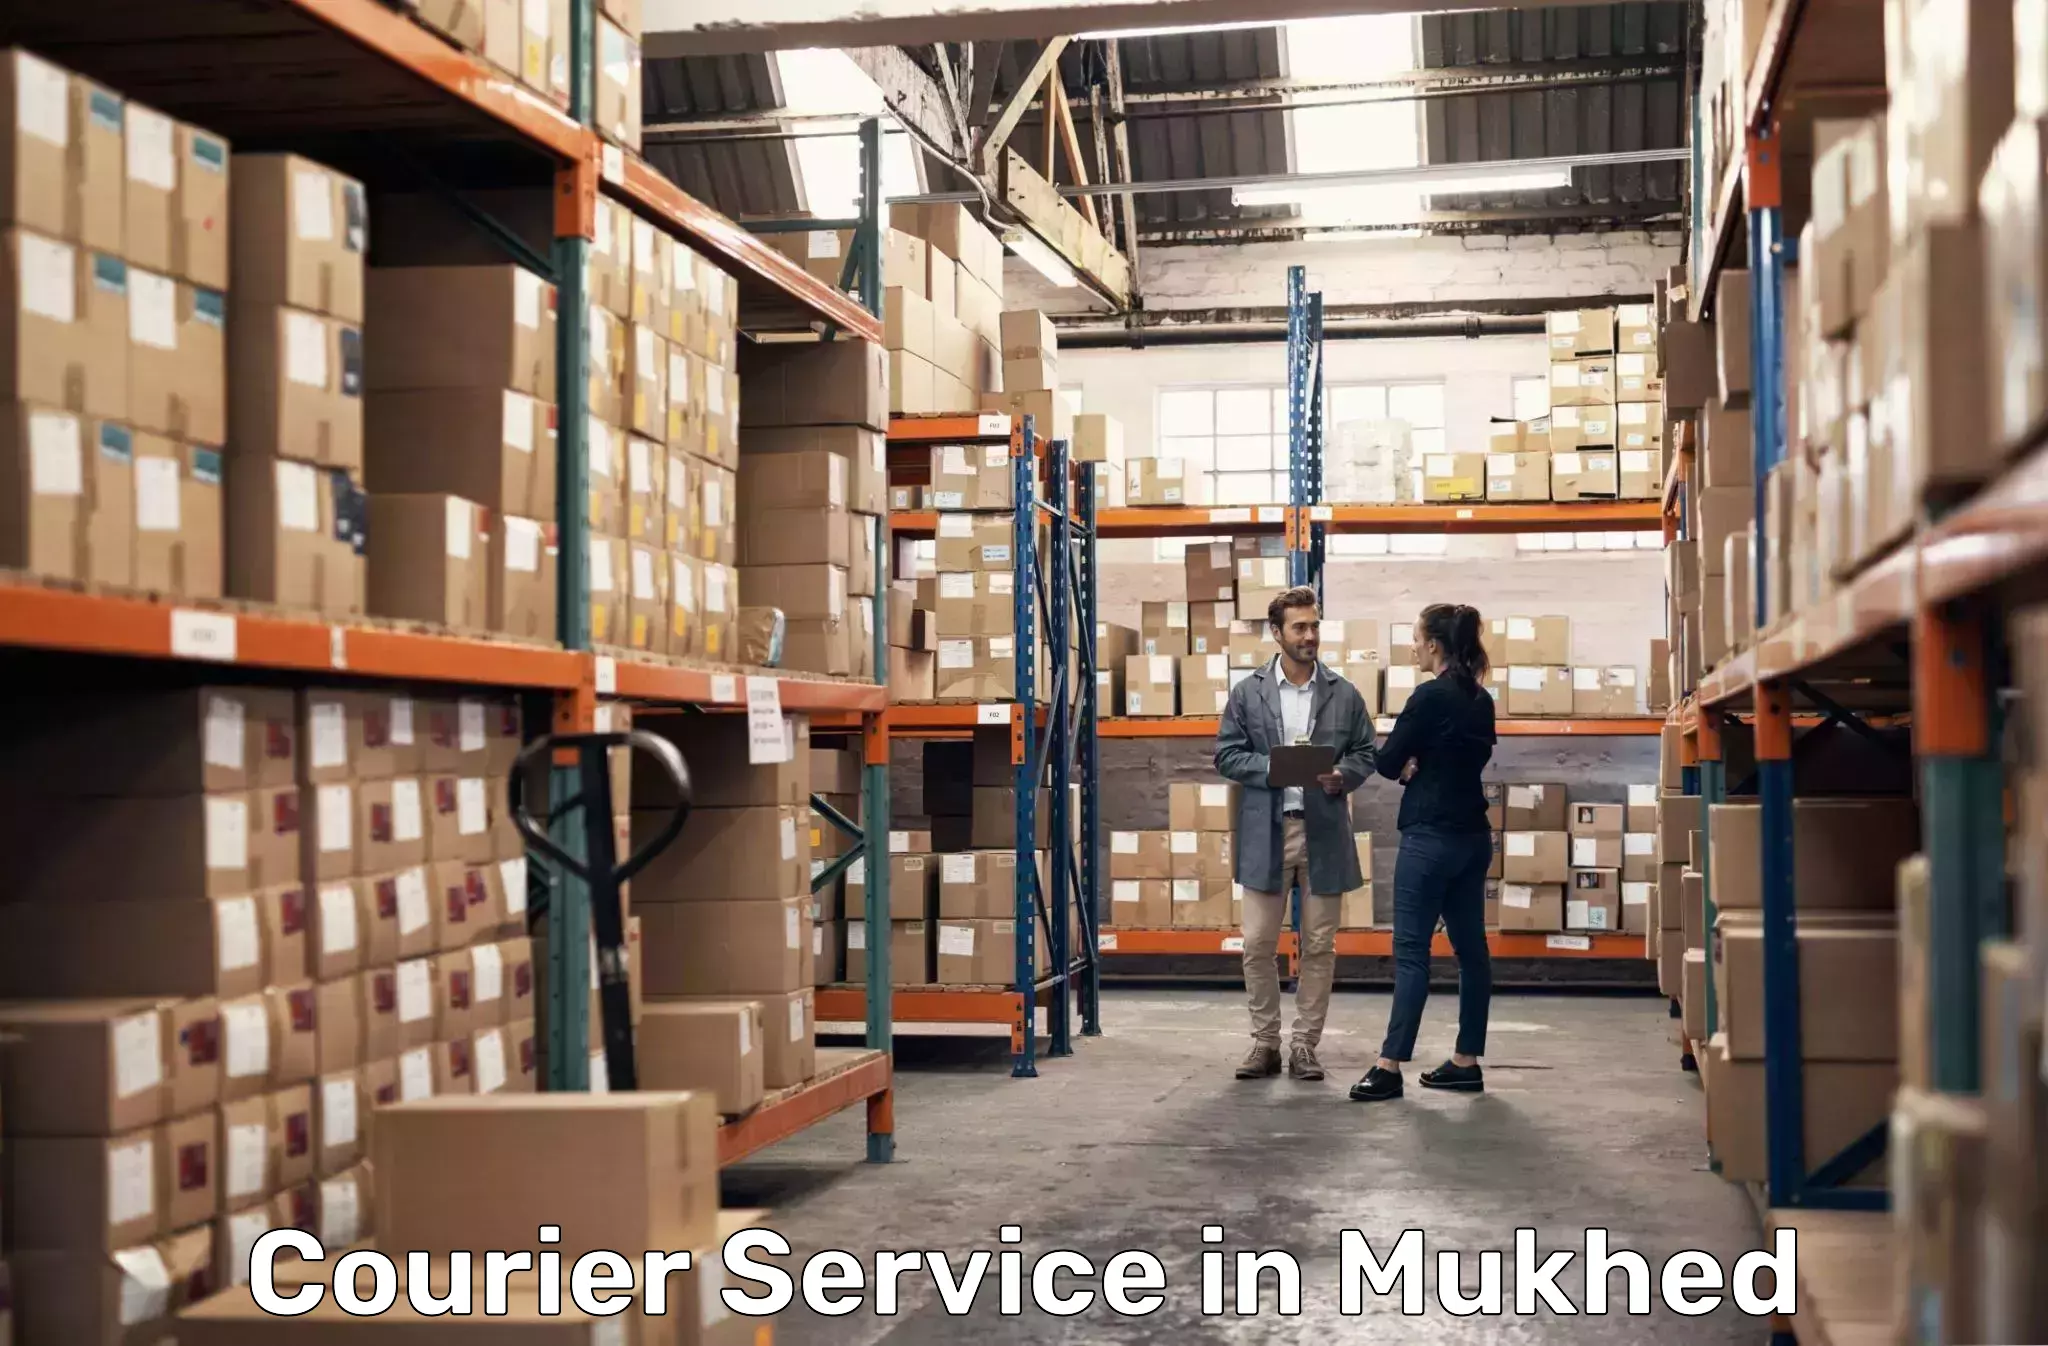 Optimized delivery routes in Mukhed